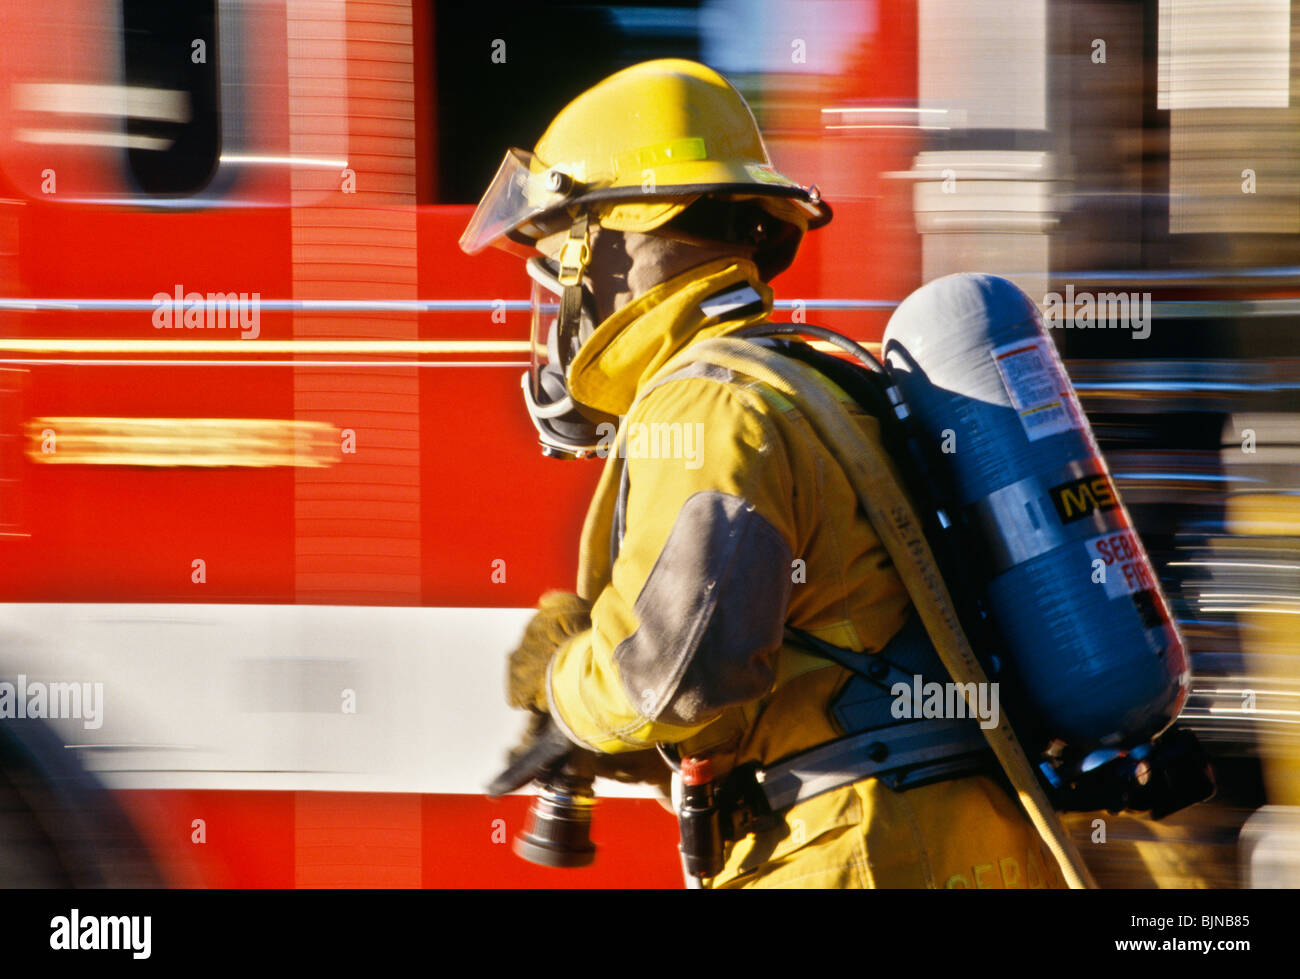 Fireman in Full Gear Running with Hose, USA Stock Photo